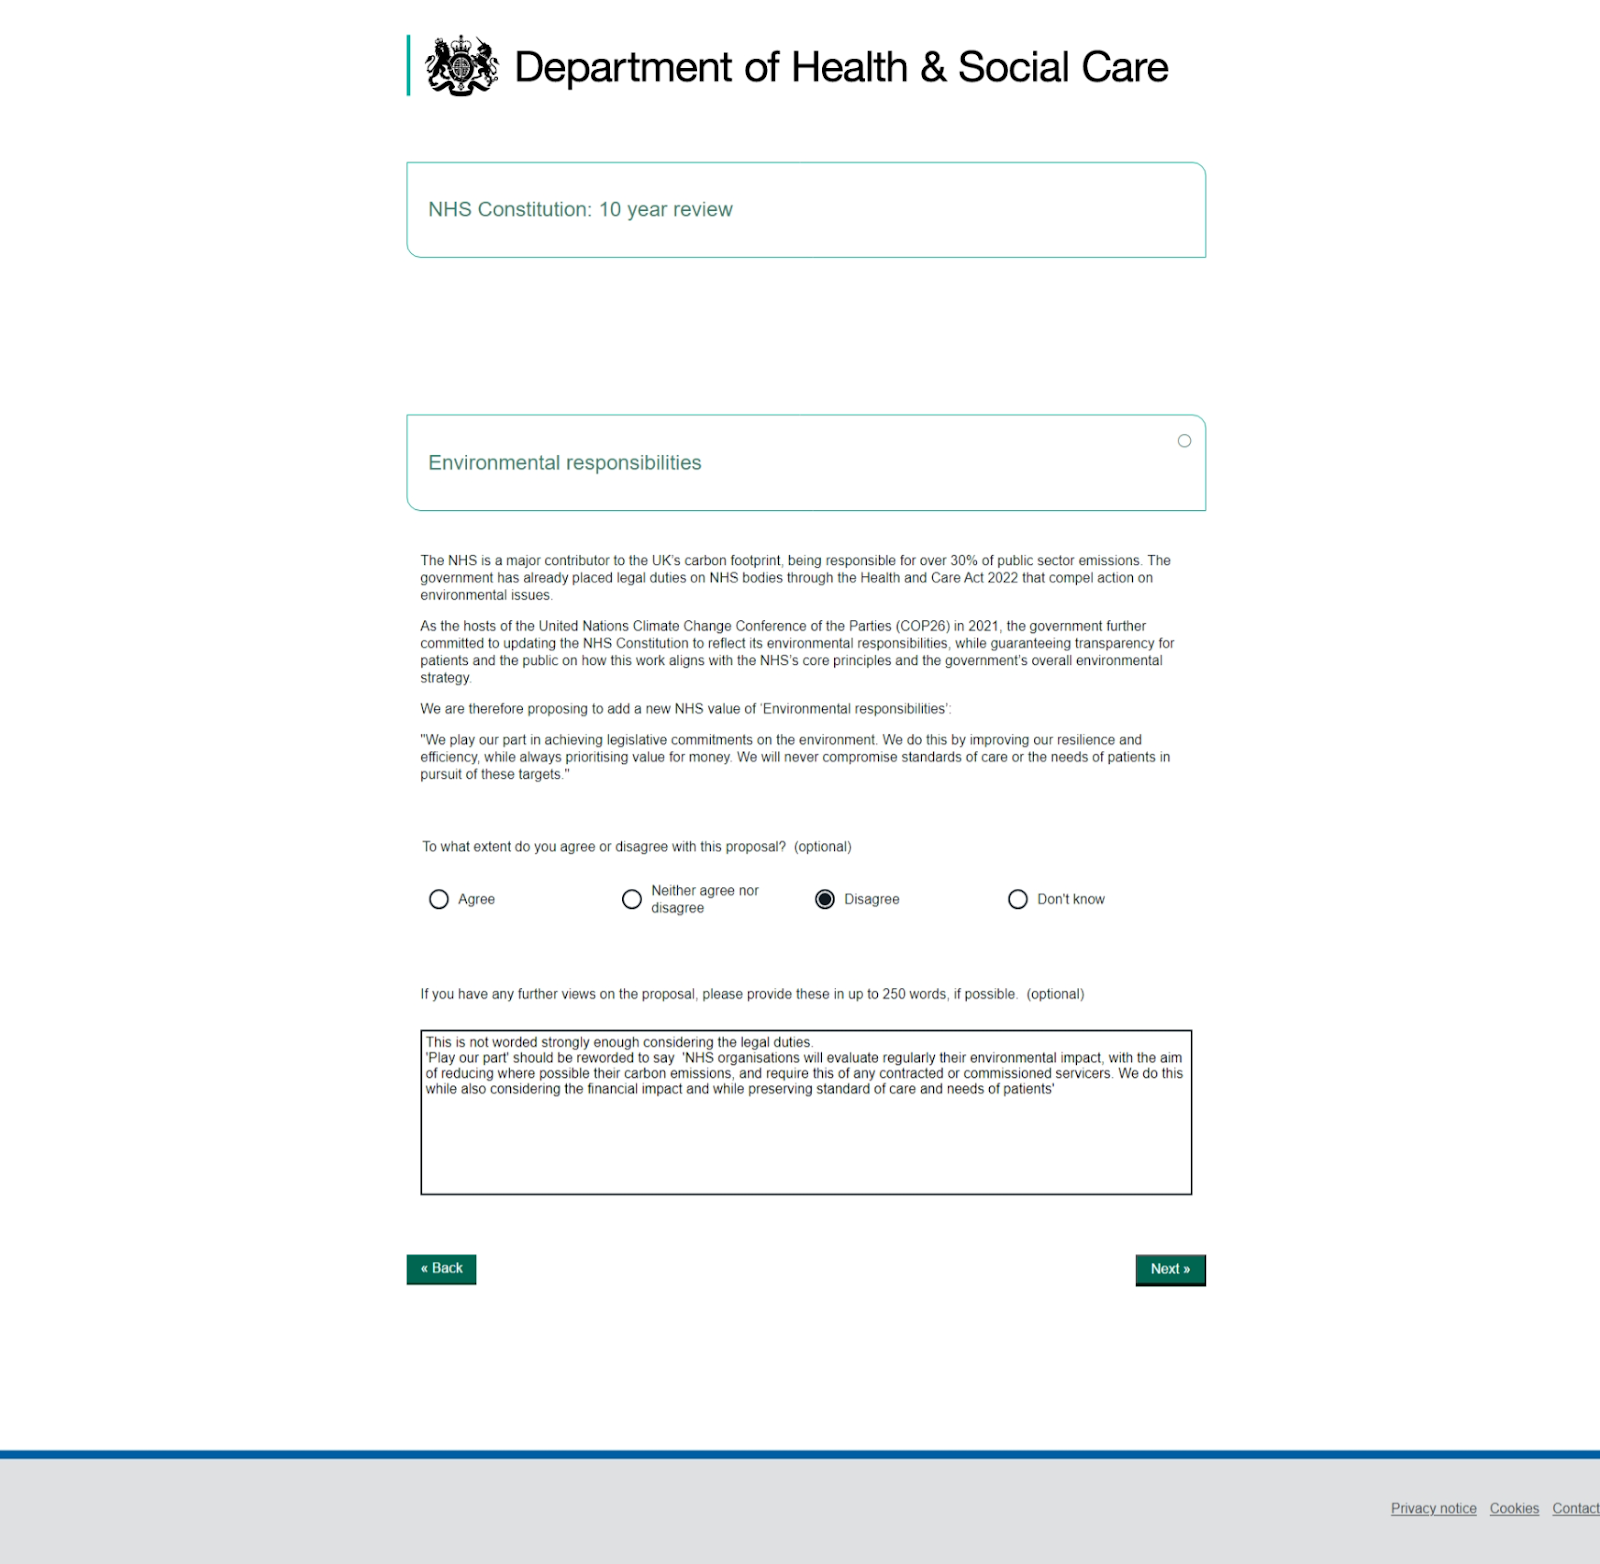 webpage showing question relating to envirnomental aspects of NHS